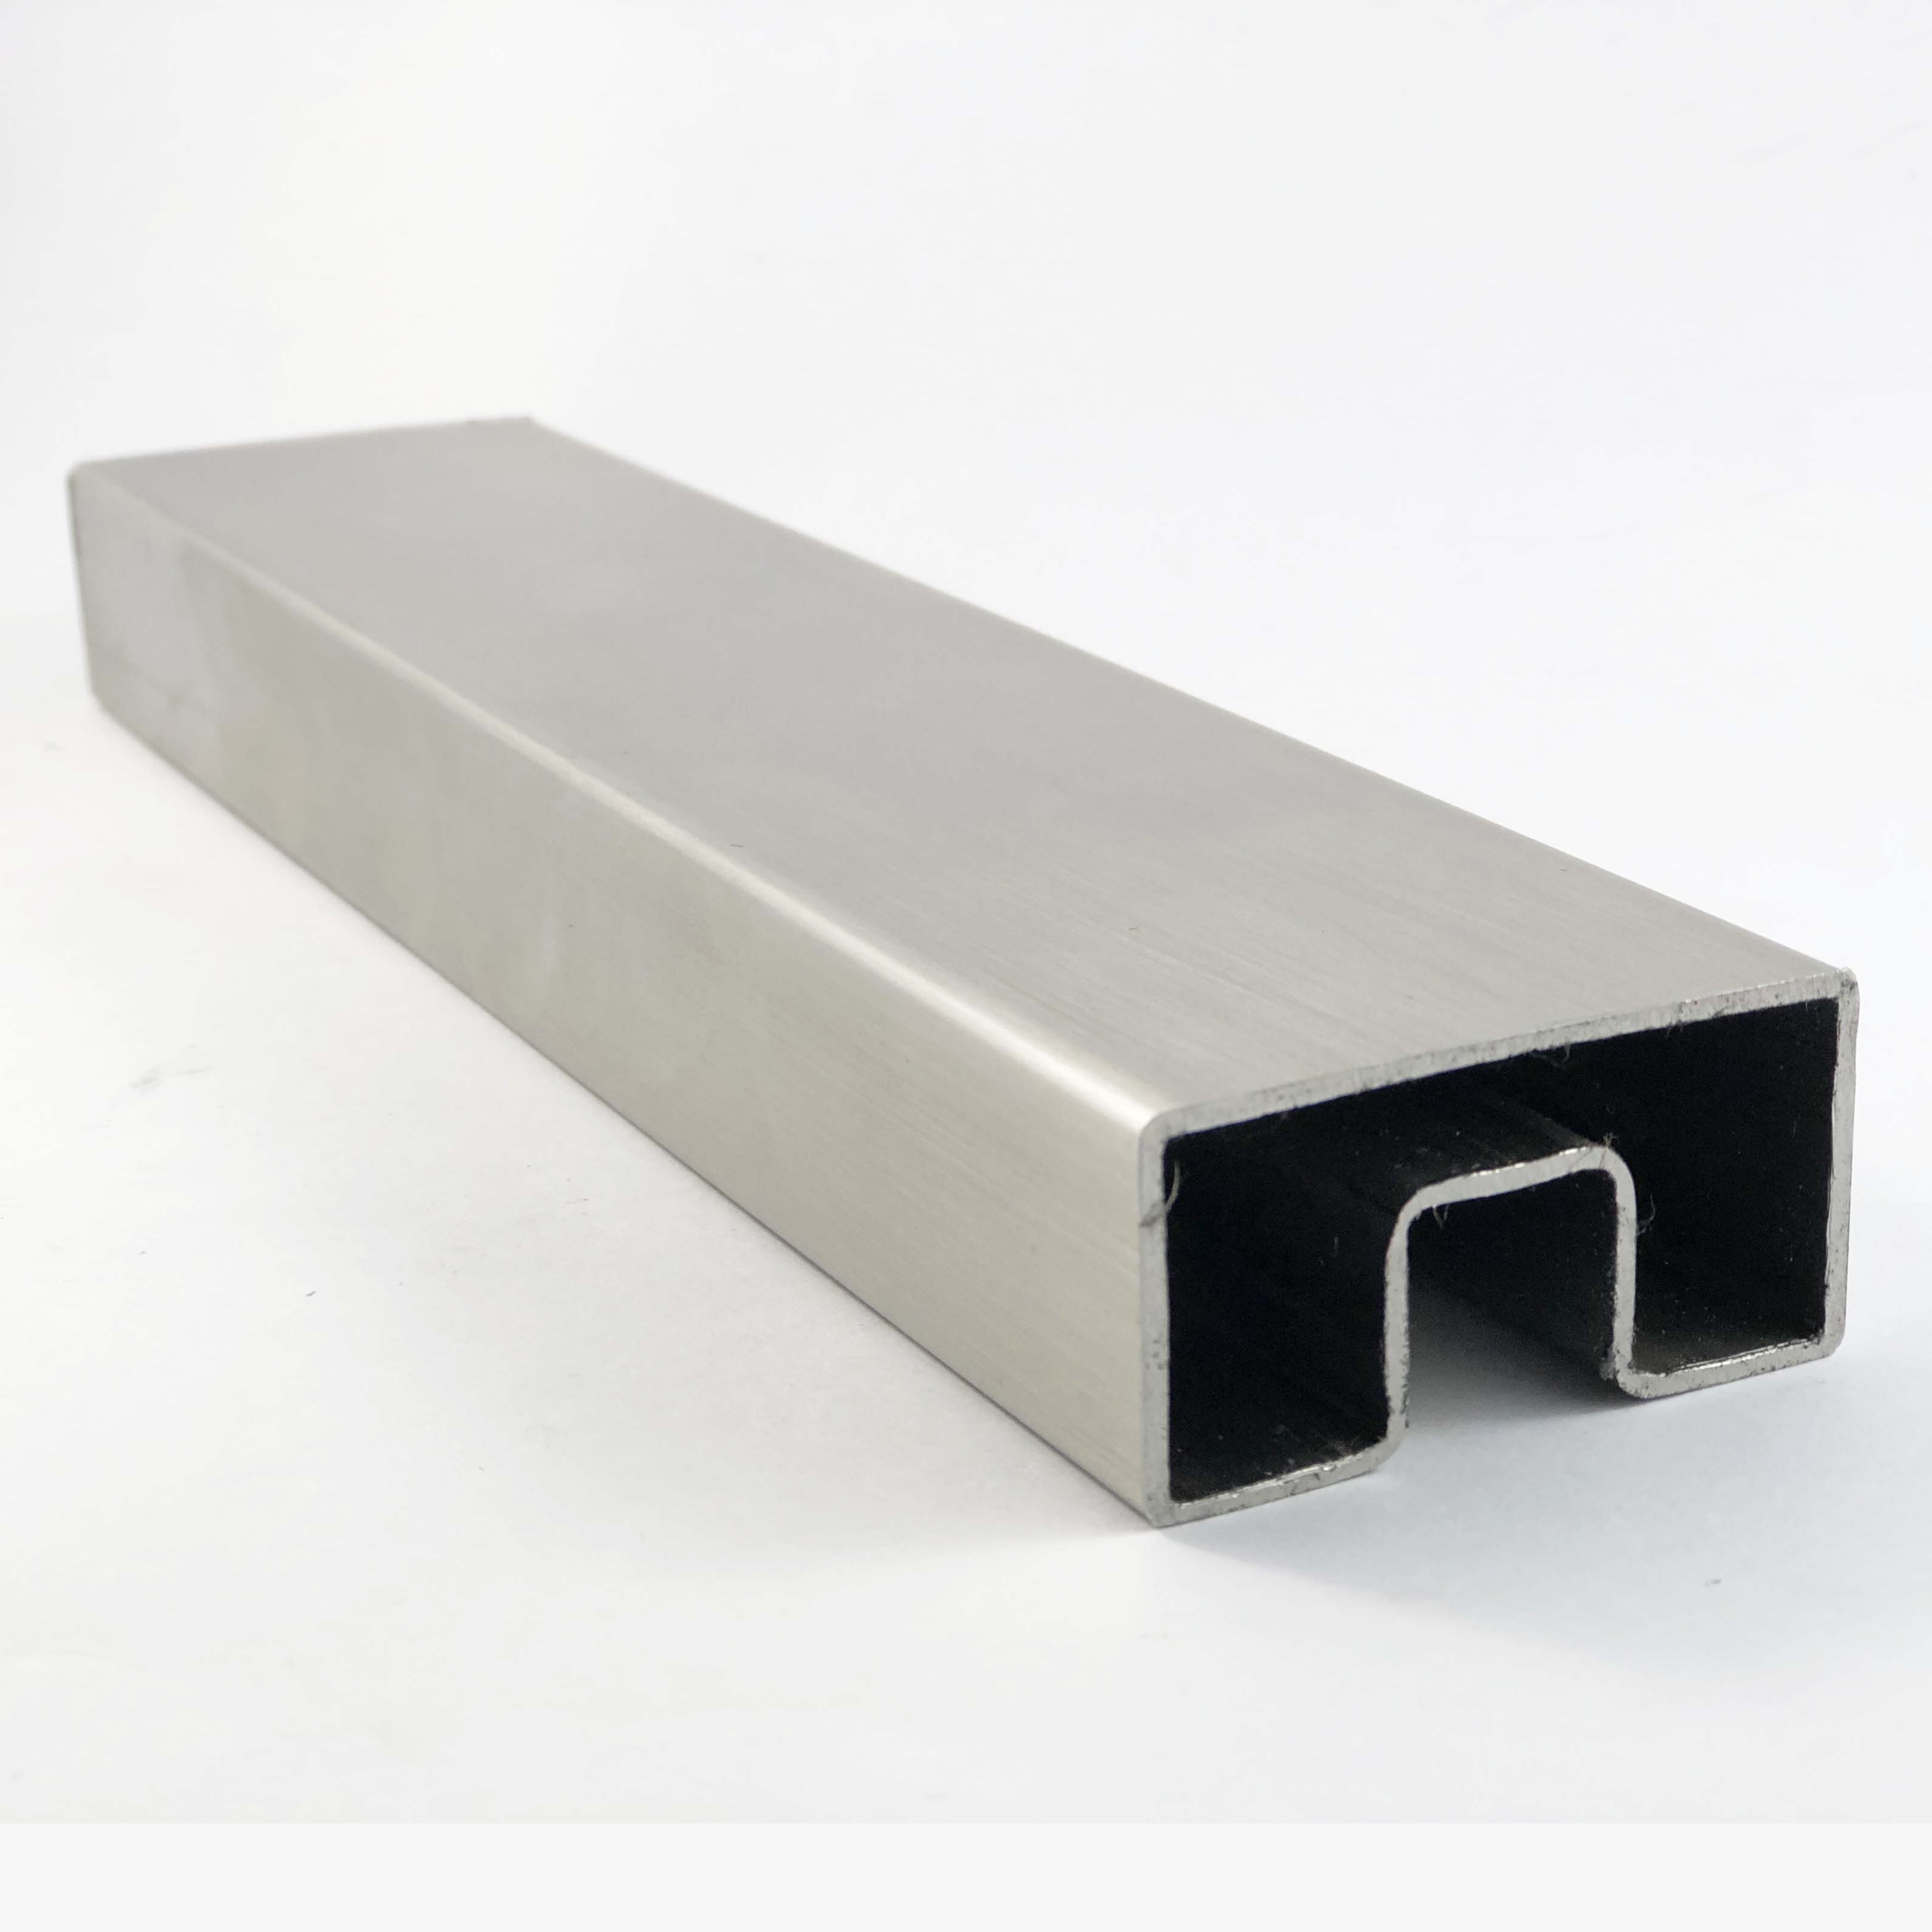 Tube Slotted 25mm x 50mm Stainless Steel 5800mm - Polished